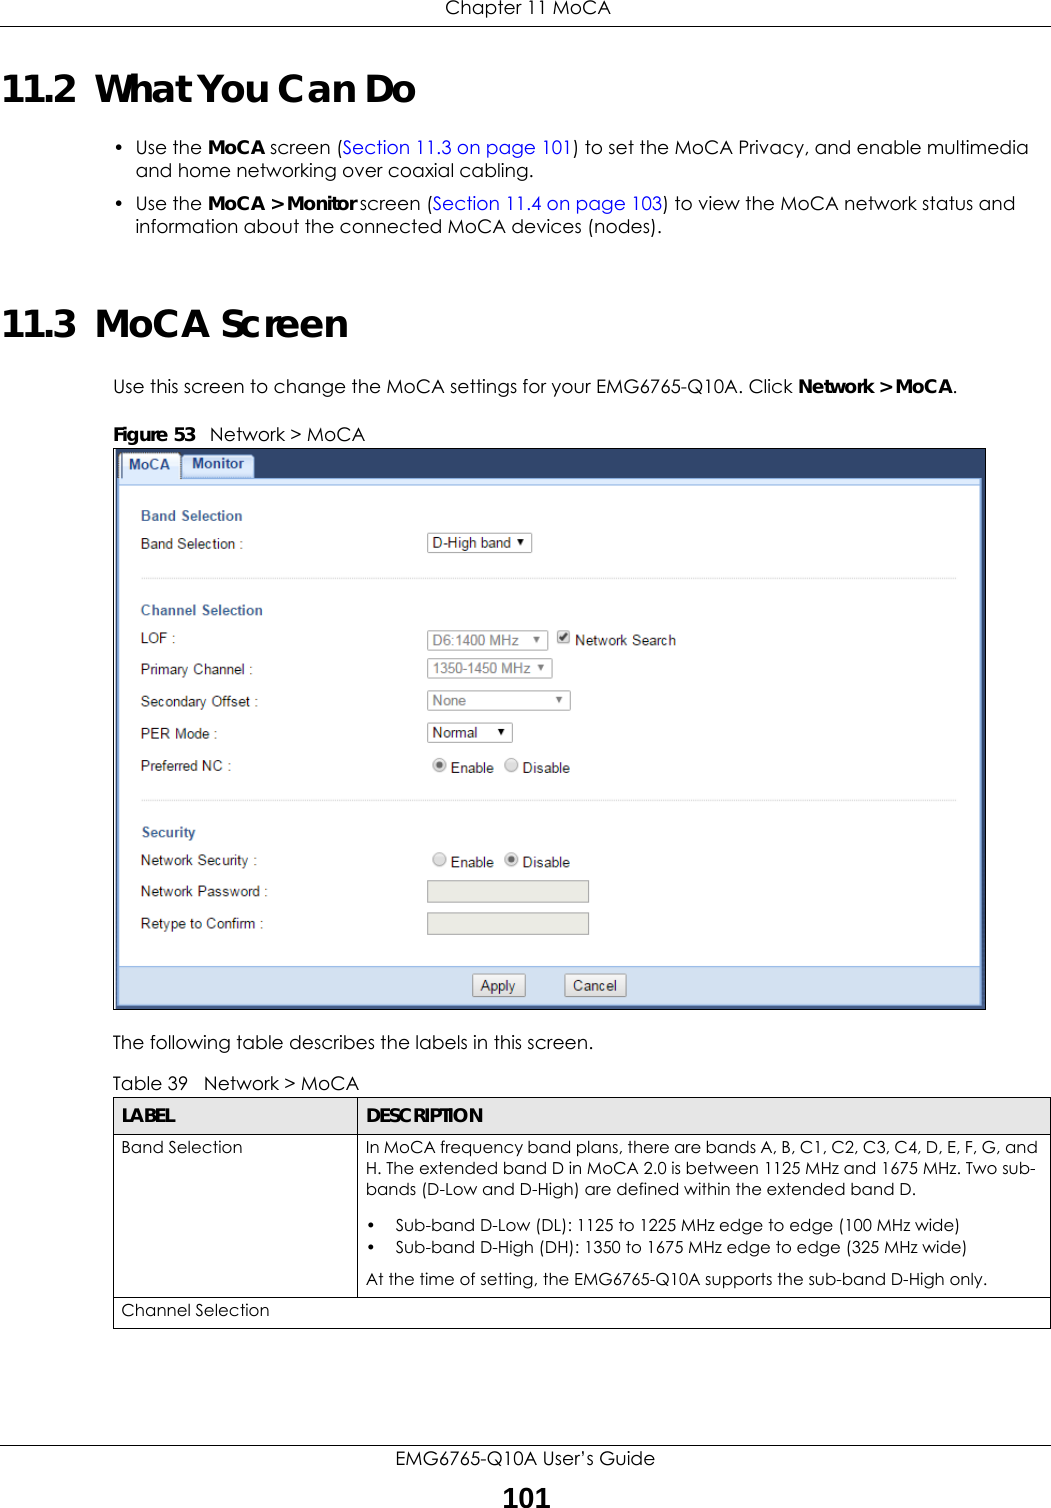  Chapter 11 MoCAEMG6765-Q10A User’s Guide10111.2  What You Can Do• Use the MoCA screen (Section 11.3 on page 101) to set the MoCA Privacy, and enable multimedia and home networking over coaxial cabling.• Use the MoCA &gt; Monitor screen (Section 11.4 on page 103) to view the MoCA network status and information about the connected MoCA devices (nodes).11.3  MoCA ScreenUse this screen to change the MoCA settings for your EMG6765-Q10A. Click Network &gt; MoCA.Figure 53   Network &gt; MoCAThe following table describes the labels in this screen.Table 39   Network &gt; MoCALABEL DESCRIPTIONBand Selection In MoCA frequency band plans, there are bands A, B, C1, C2, C3, C4, D, E, F, G, and H. The extended band D in MoCA 2.0 is between 1125 MHz and 1675 MHz. Two sub-bands (D-Low and D-High) are defined within the extended band D.• Sub-band D-Low (DL): 1125 to 1225 MHz edge to edge (100 MHz wide)• Sub-band D-High (DH): 1350 to 1675 MHz edge to edge (325 MHz wide)At the time of setting, the EMG6765-Q10A supports the sub-band D-High only.Channel Selection